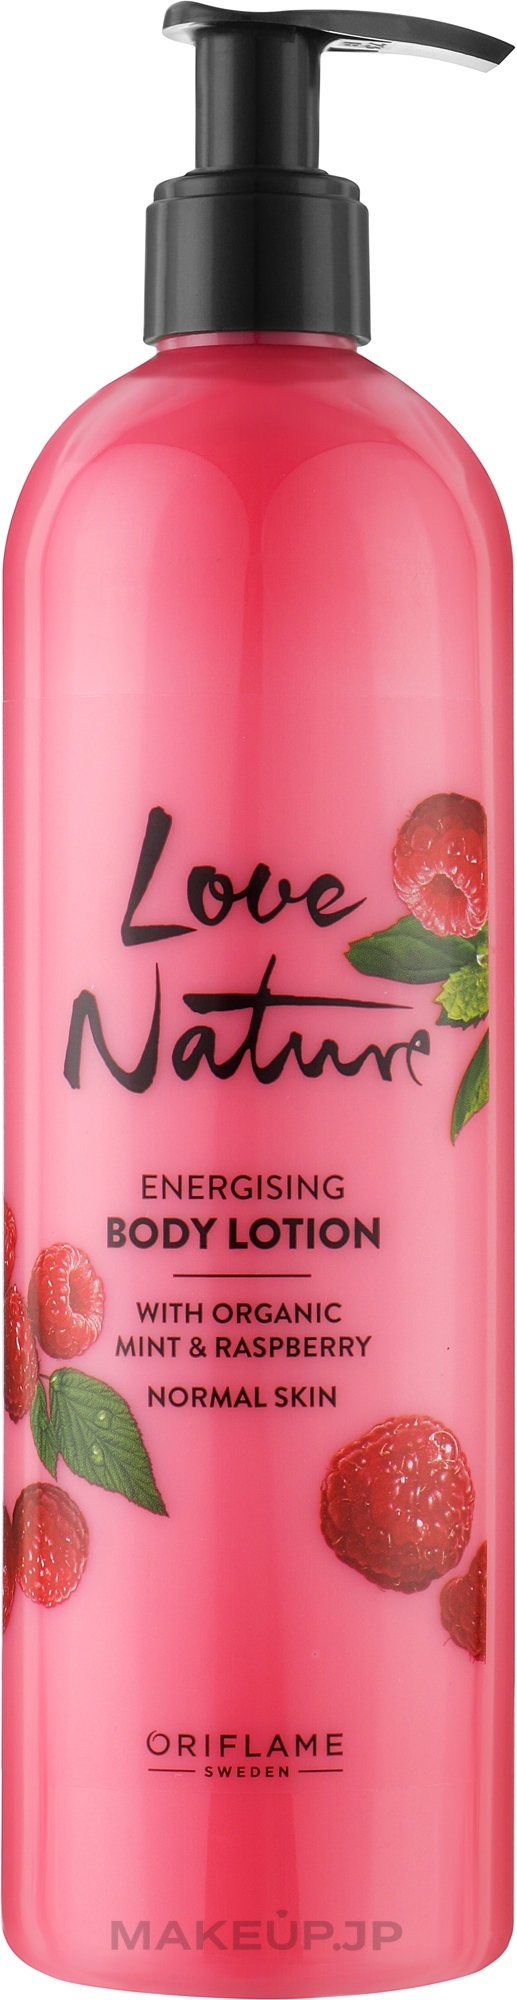 Organic Peppermint & Raspberry Body Lotion - Oriflame Love Nature Energising Body Lotion with Organic Mint & Raspberry — photo 500 ml